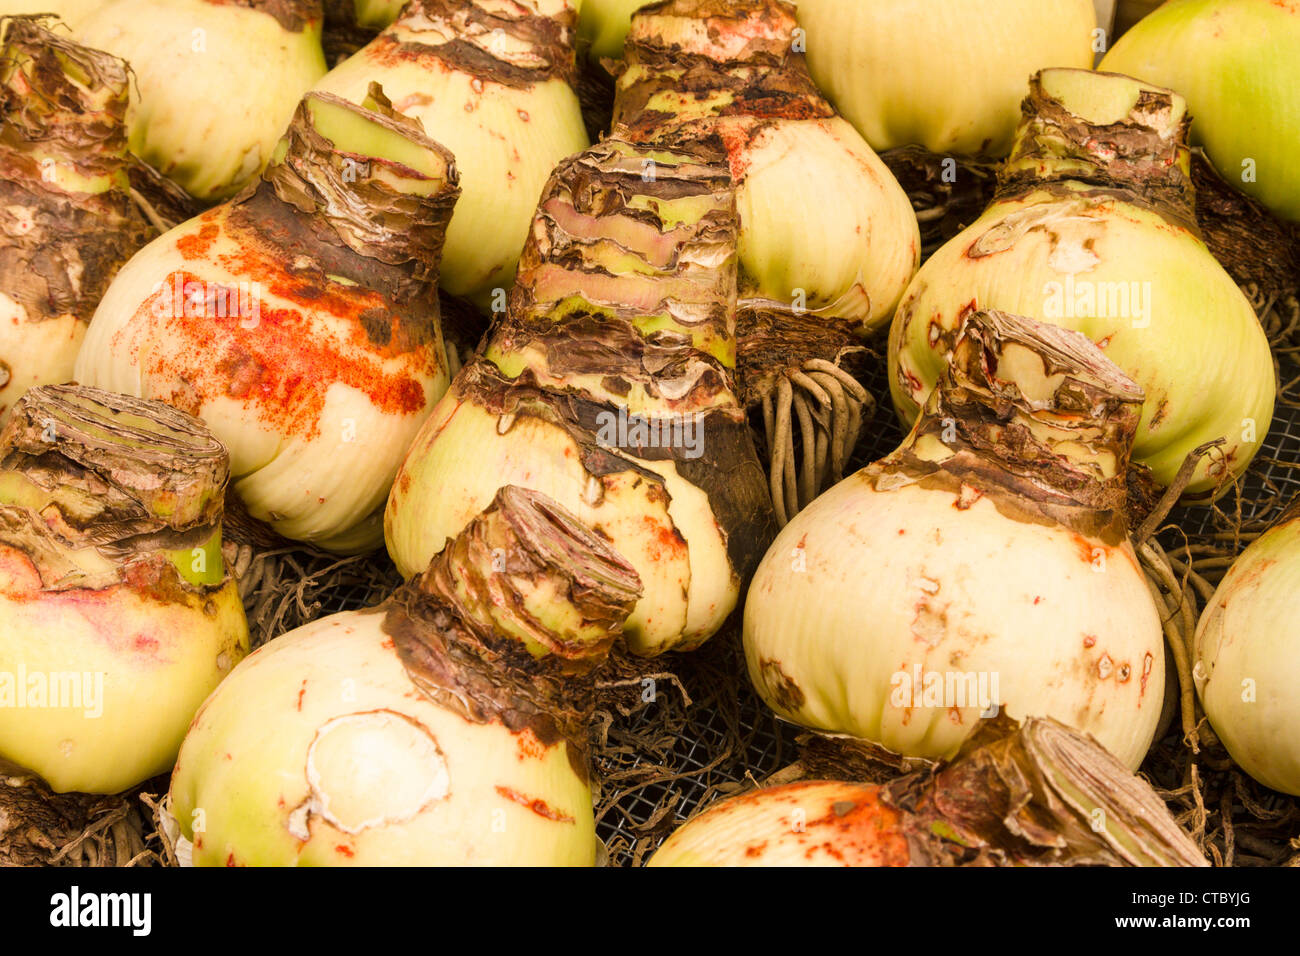 Amaryllis bulbs for sale at Flower market Stock Photo